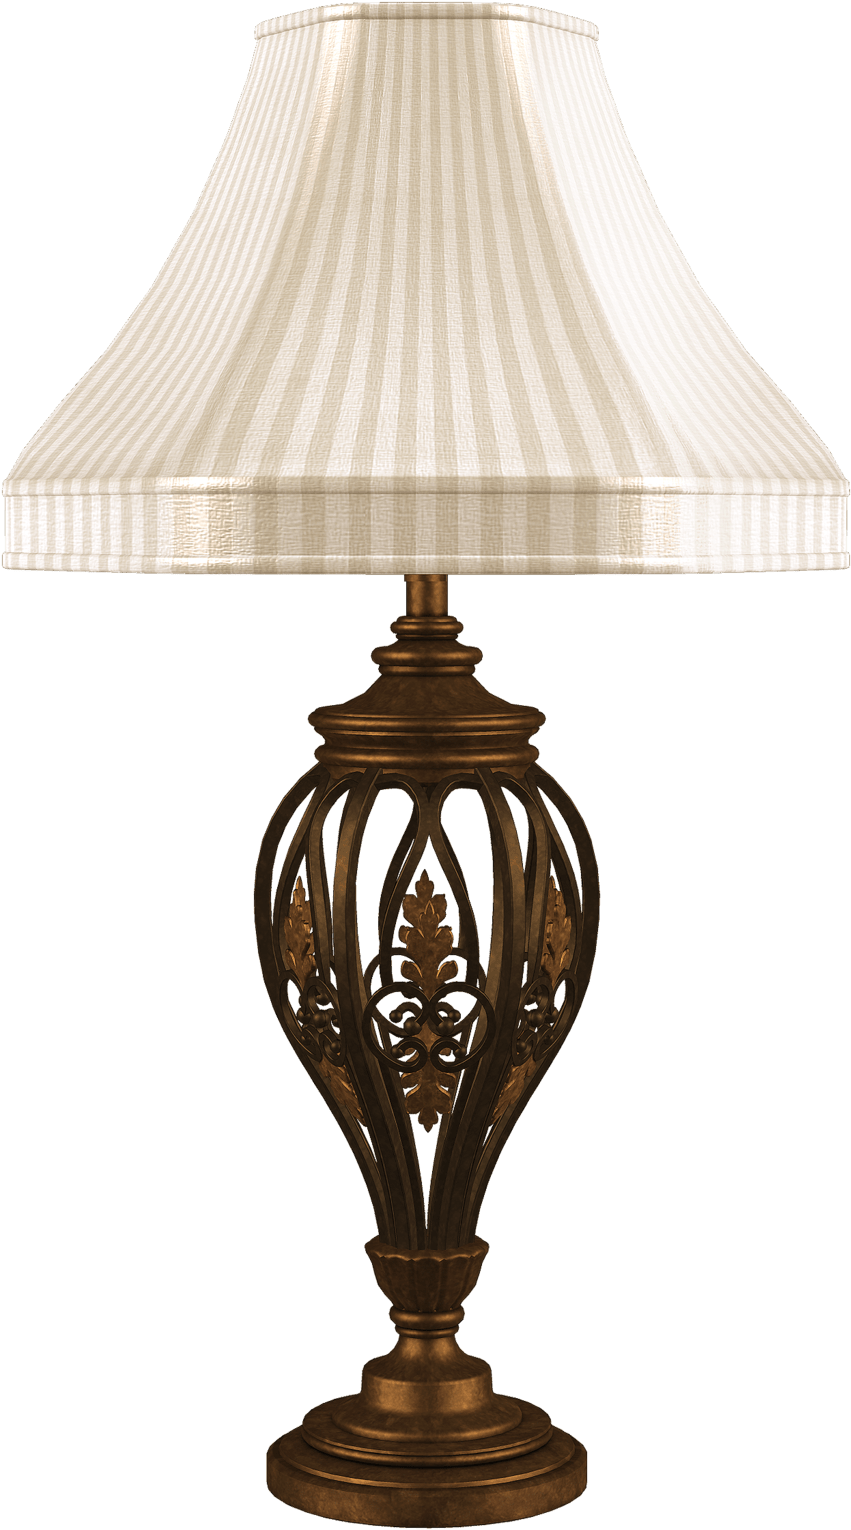 Unrestricted Vintage Lamp Render By Frozenstocks On - Lampshade (1024x1674)